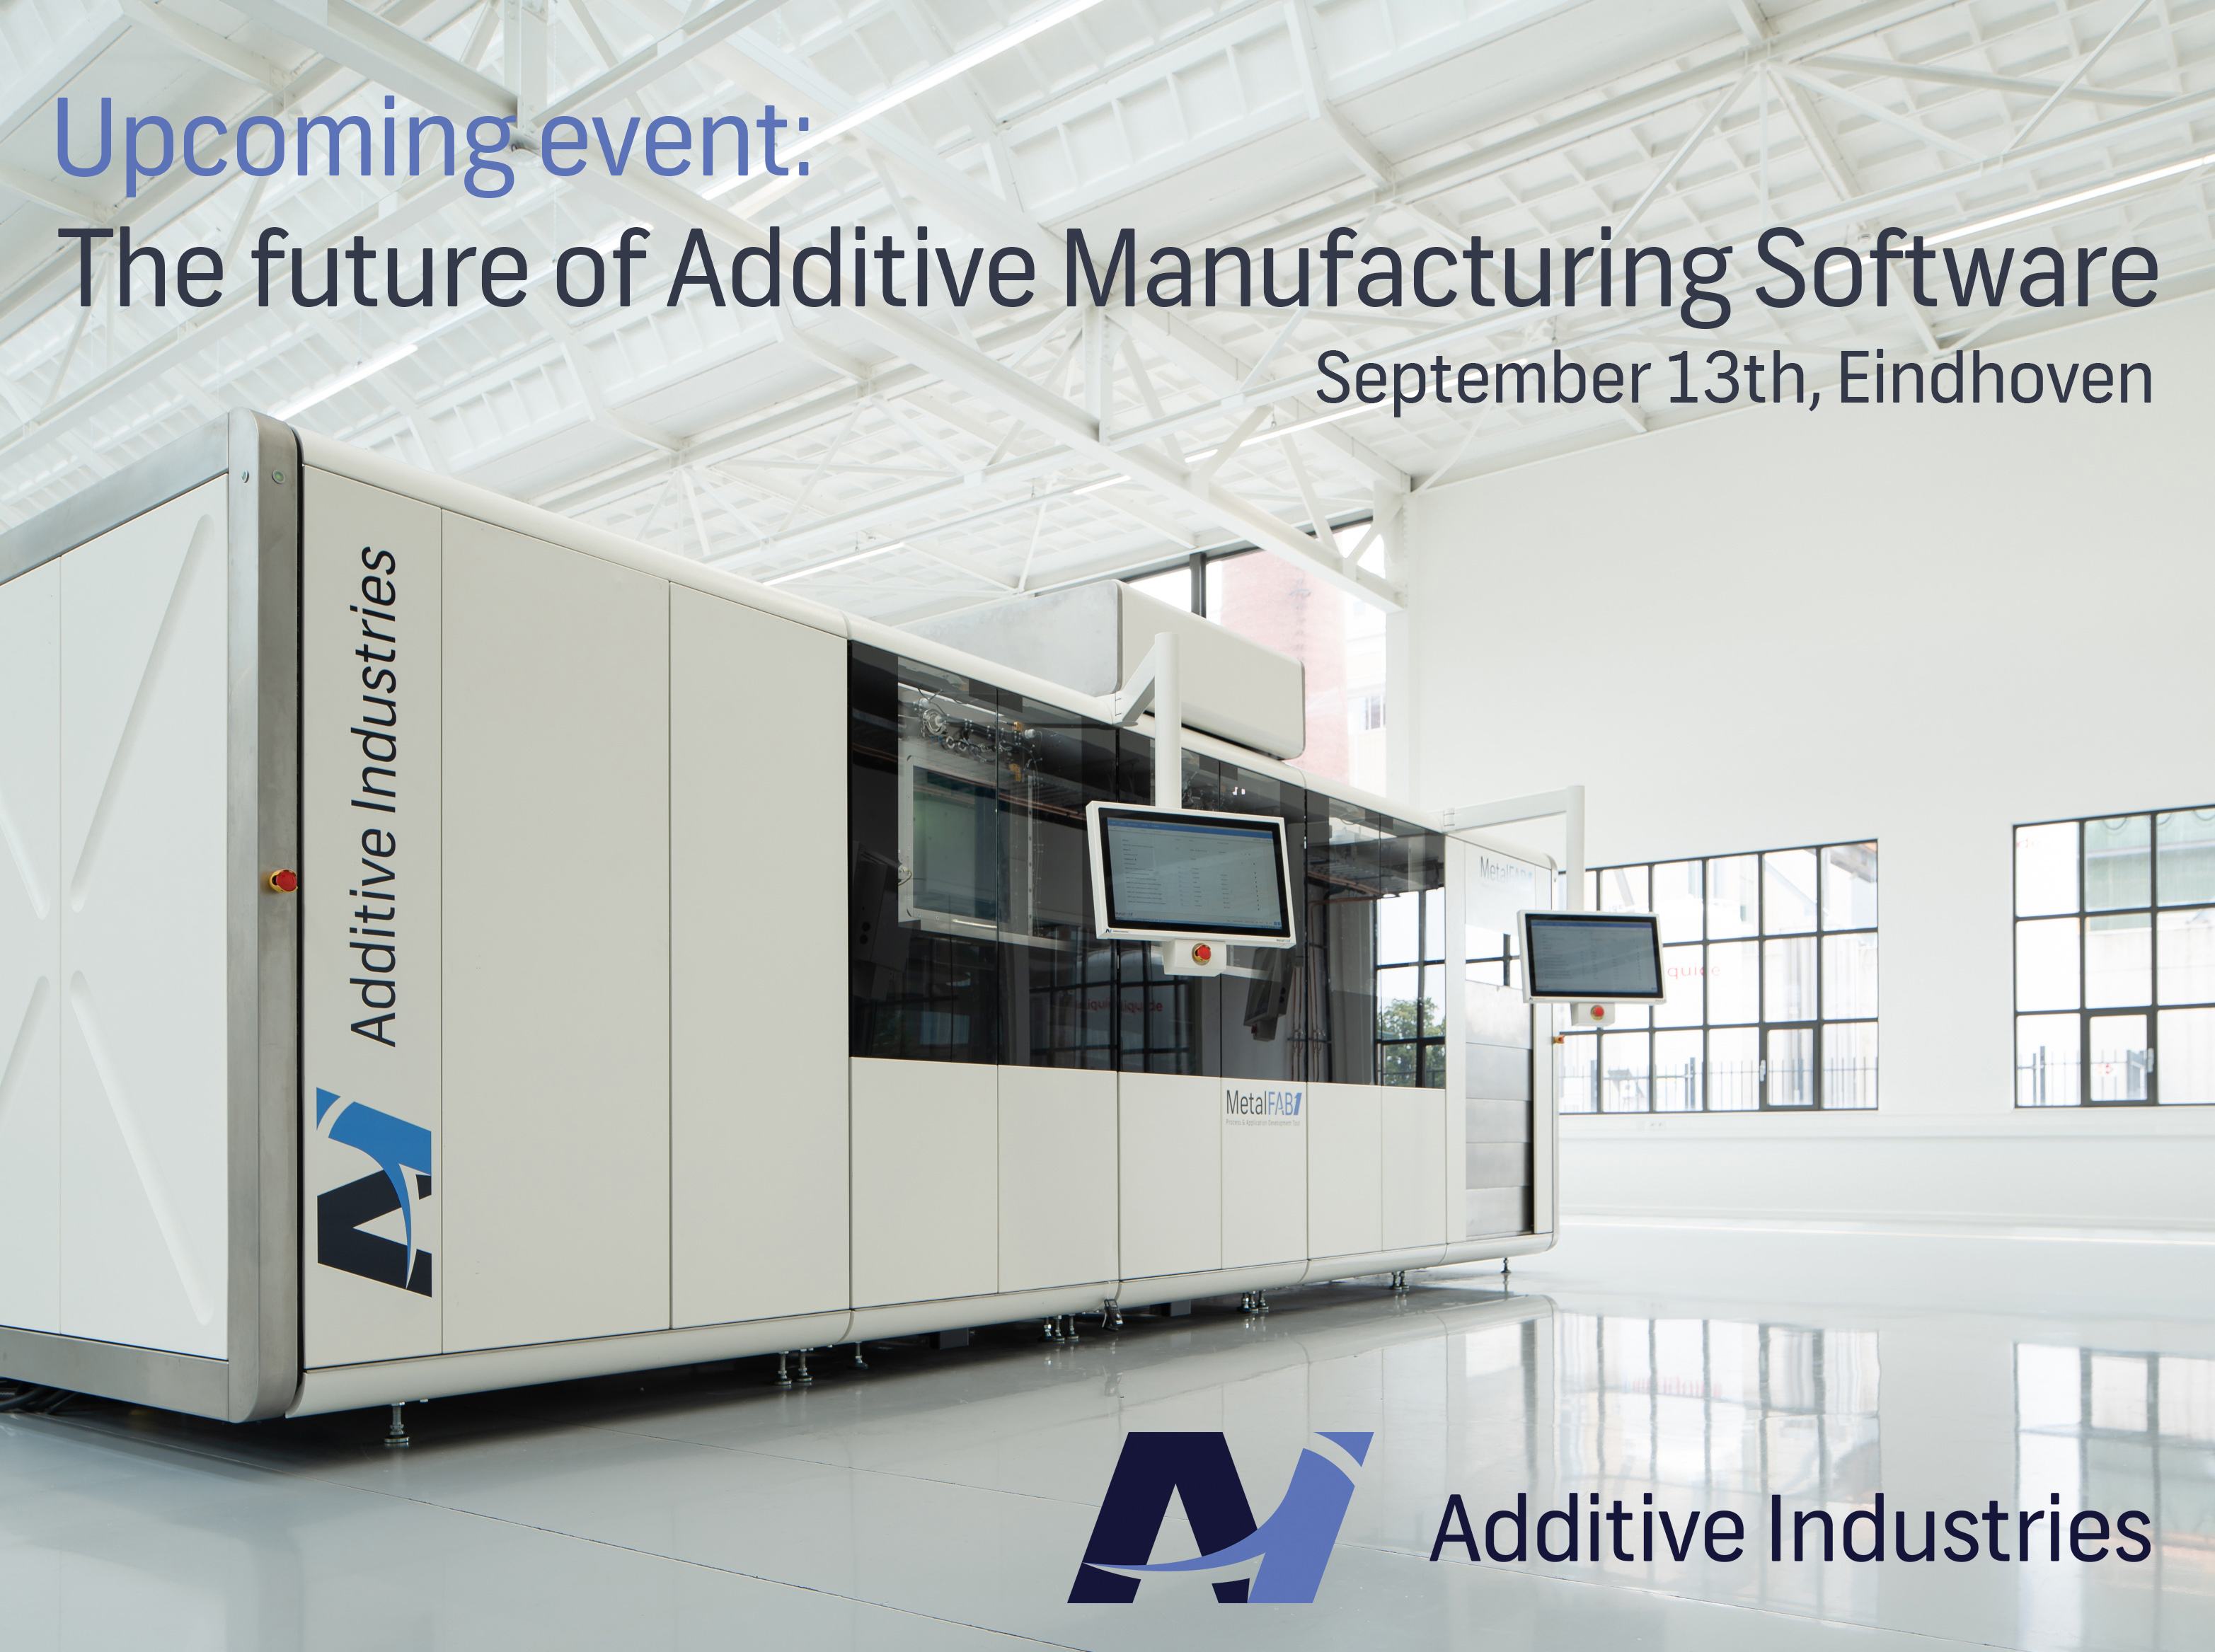 The future of Additive Manufacturing Software